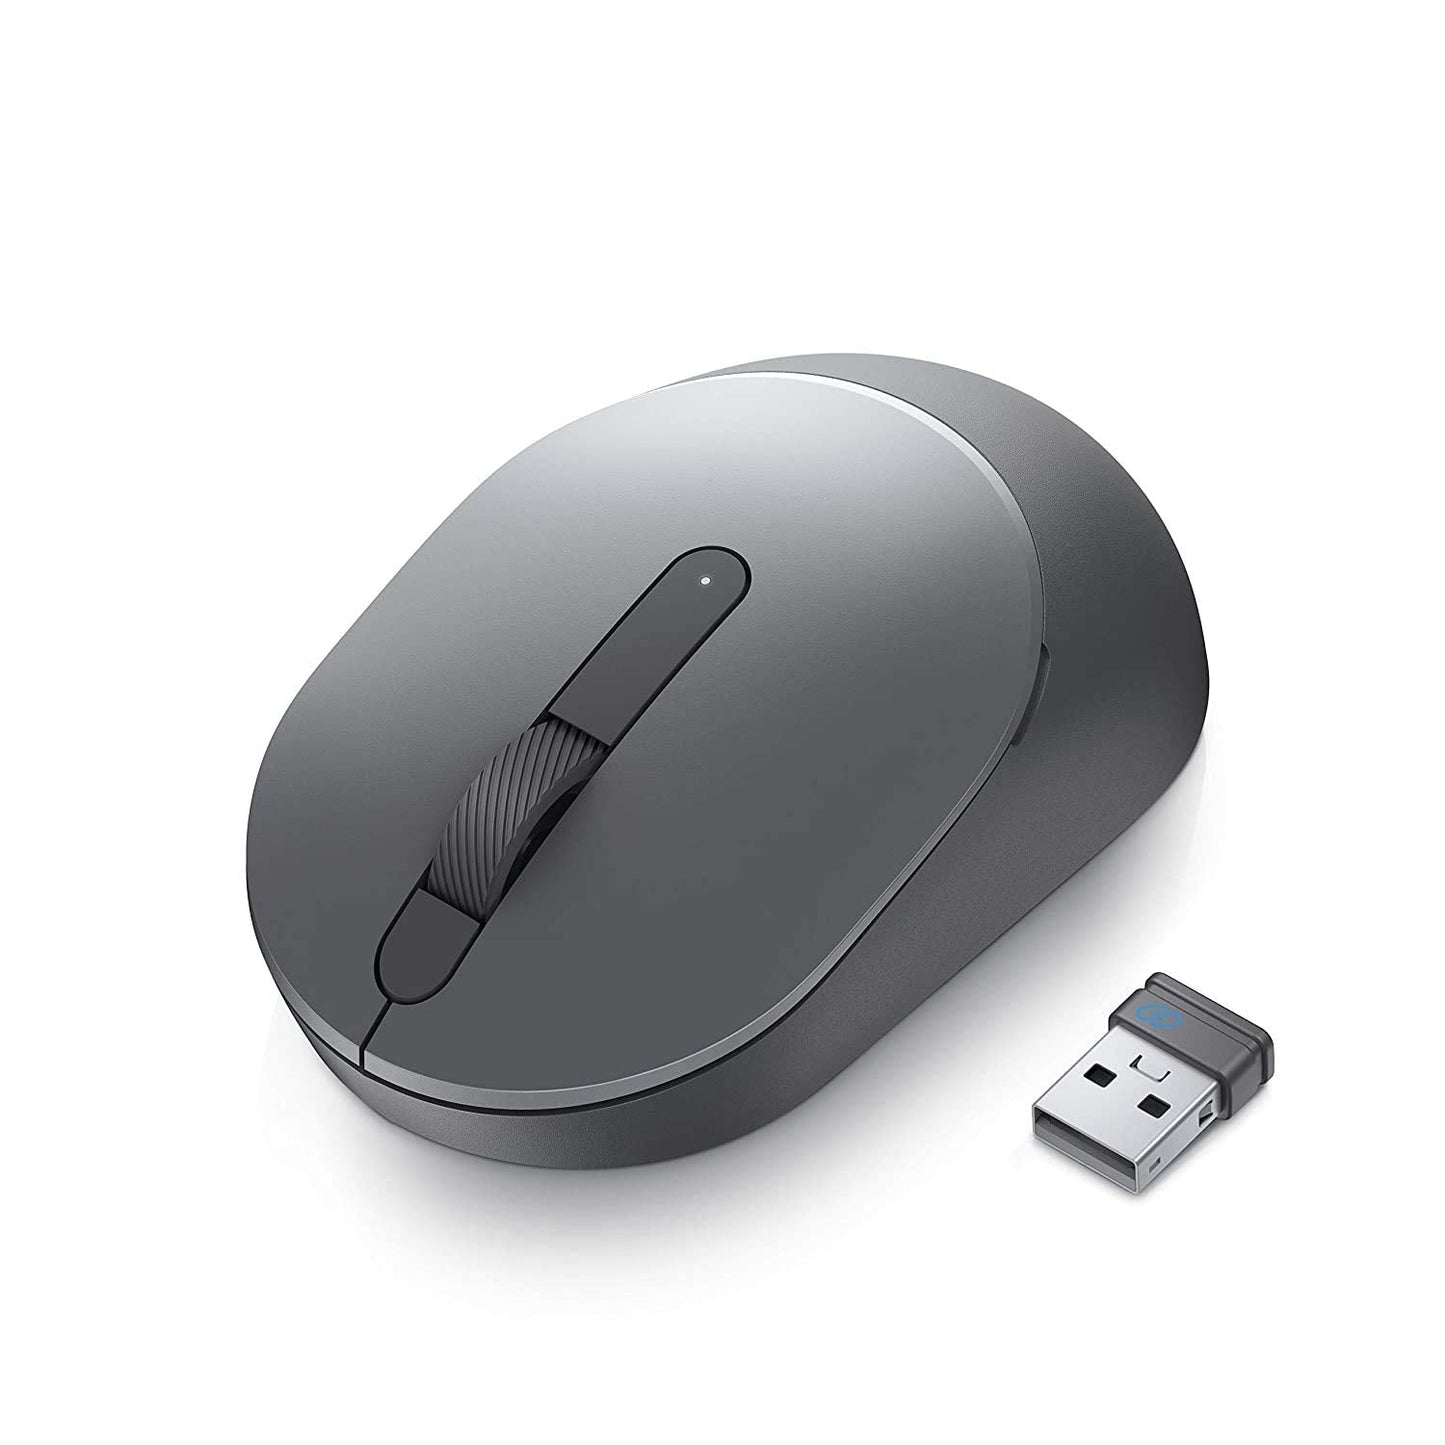 Dell MS3320W Optical Wireless Mouse with toggle and 1600DPI From TPS Technologies